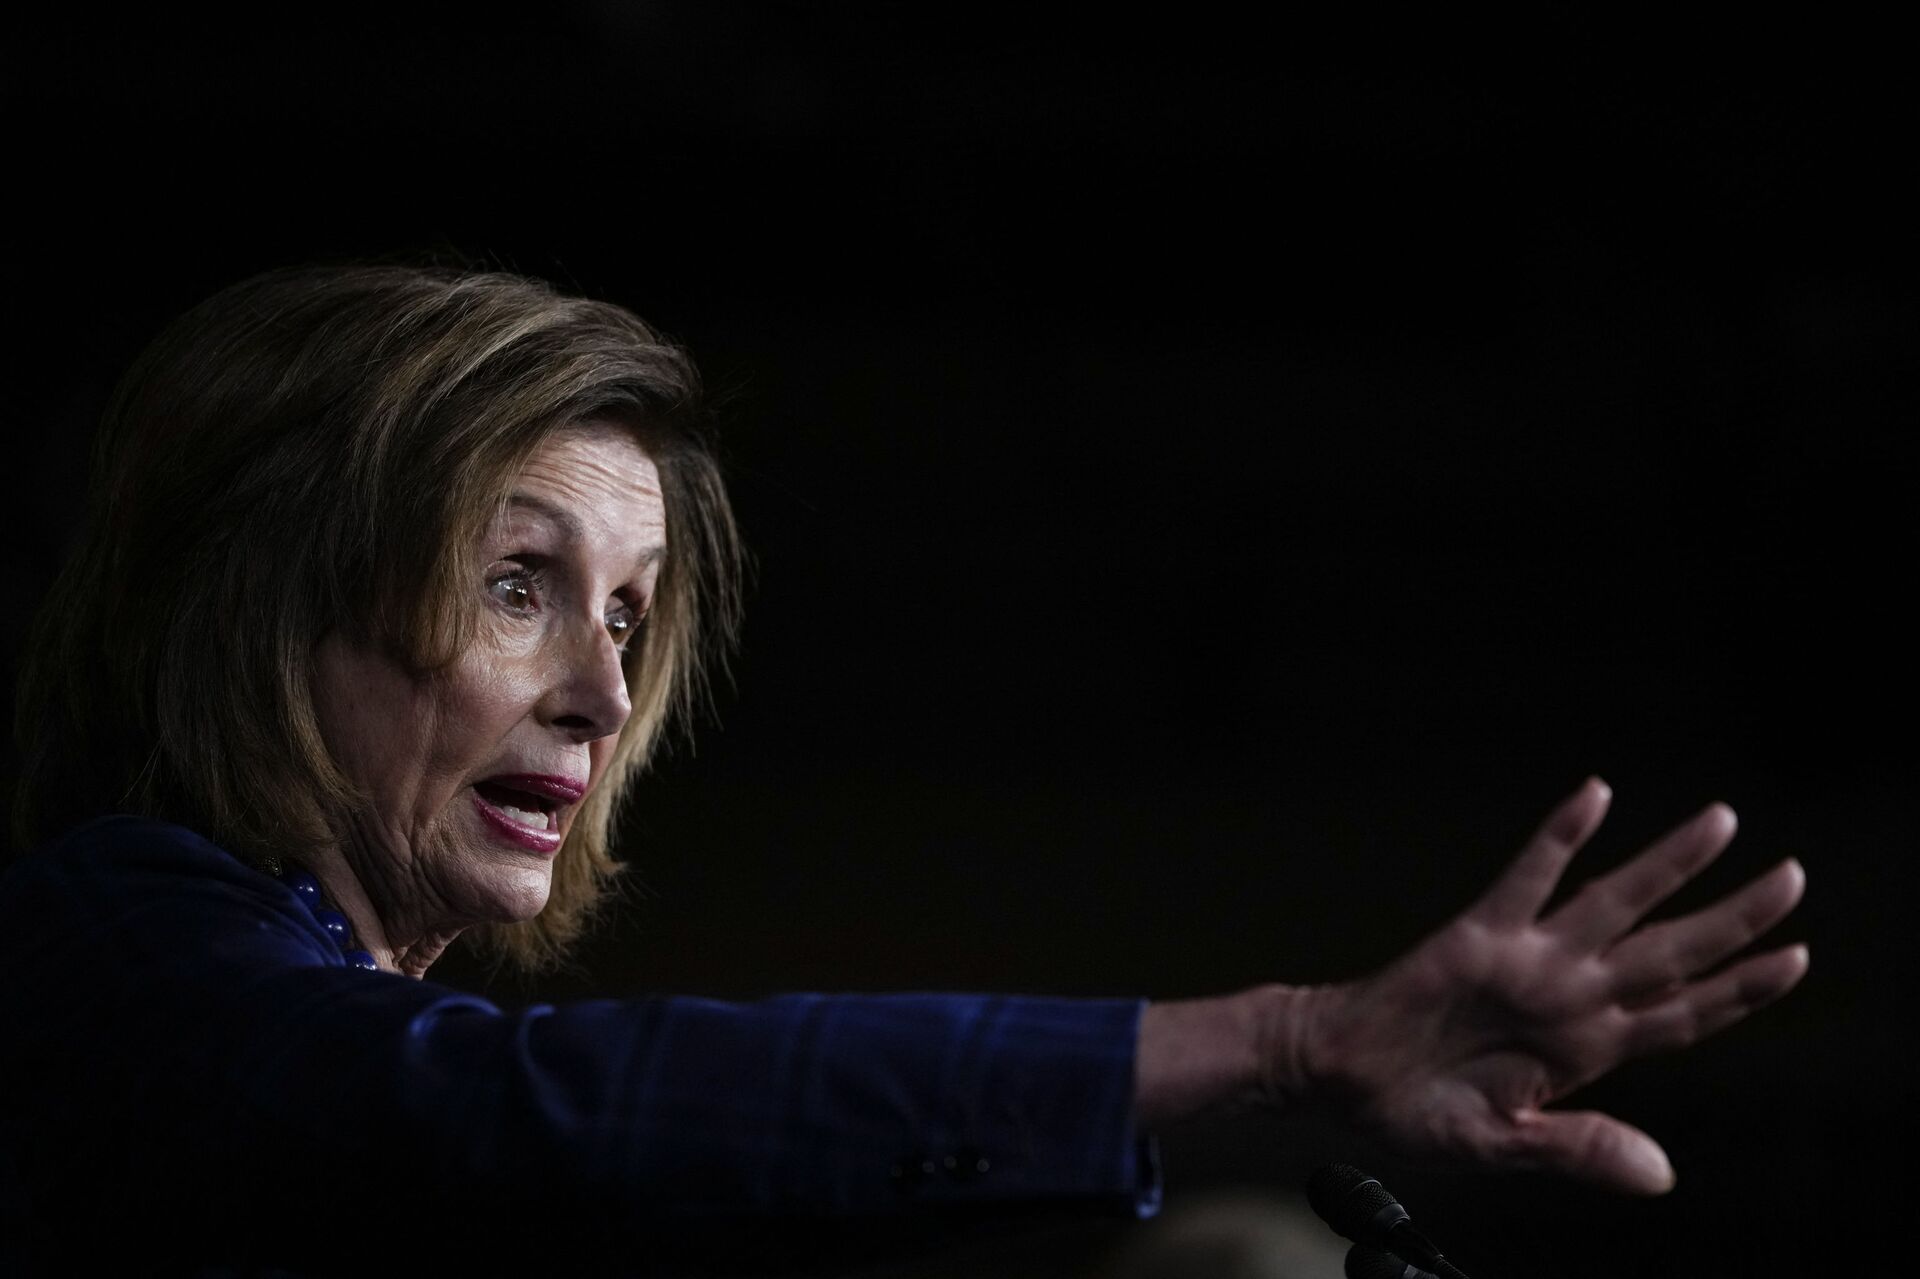 Speaker of the House Nancy Pelosi (D-CA) speaks during a news conference on Capitol Hill July 30, 2021 in Washington, DC. Pelosi and House Democratic leadership held the news conference to highlight their legislative agenda.  - Sputnik International, 1920, 07.09.2021